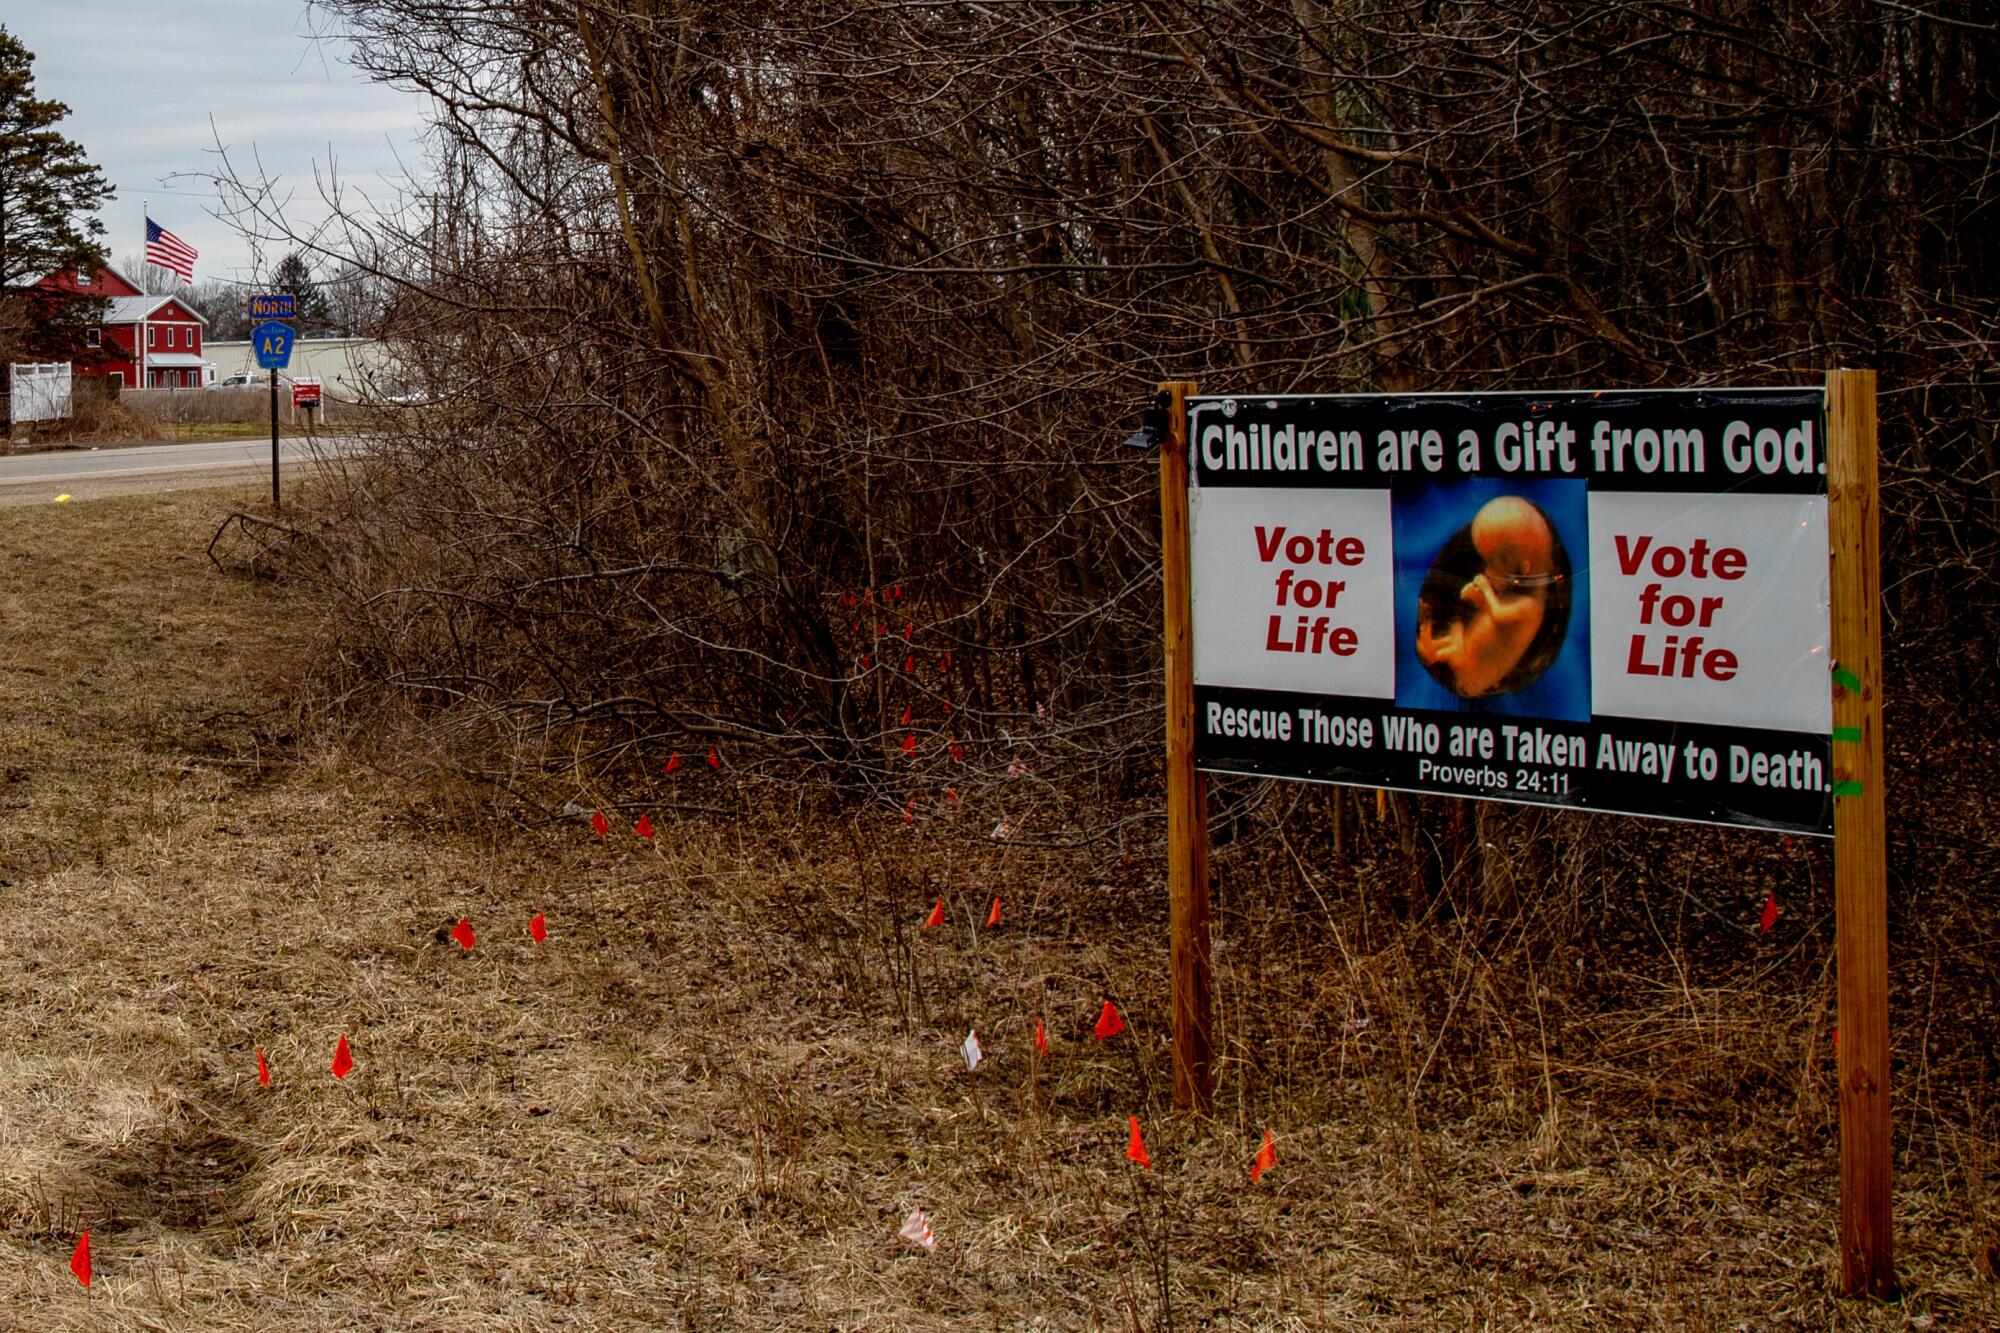 A roadside sign picturing a fetus reads, "Children are a Gift from God. Vote for Life," and quotes Proverbs 24:11.